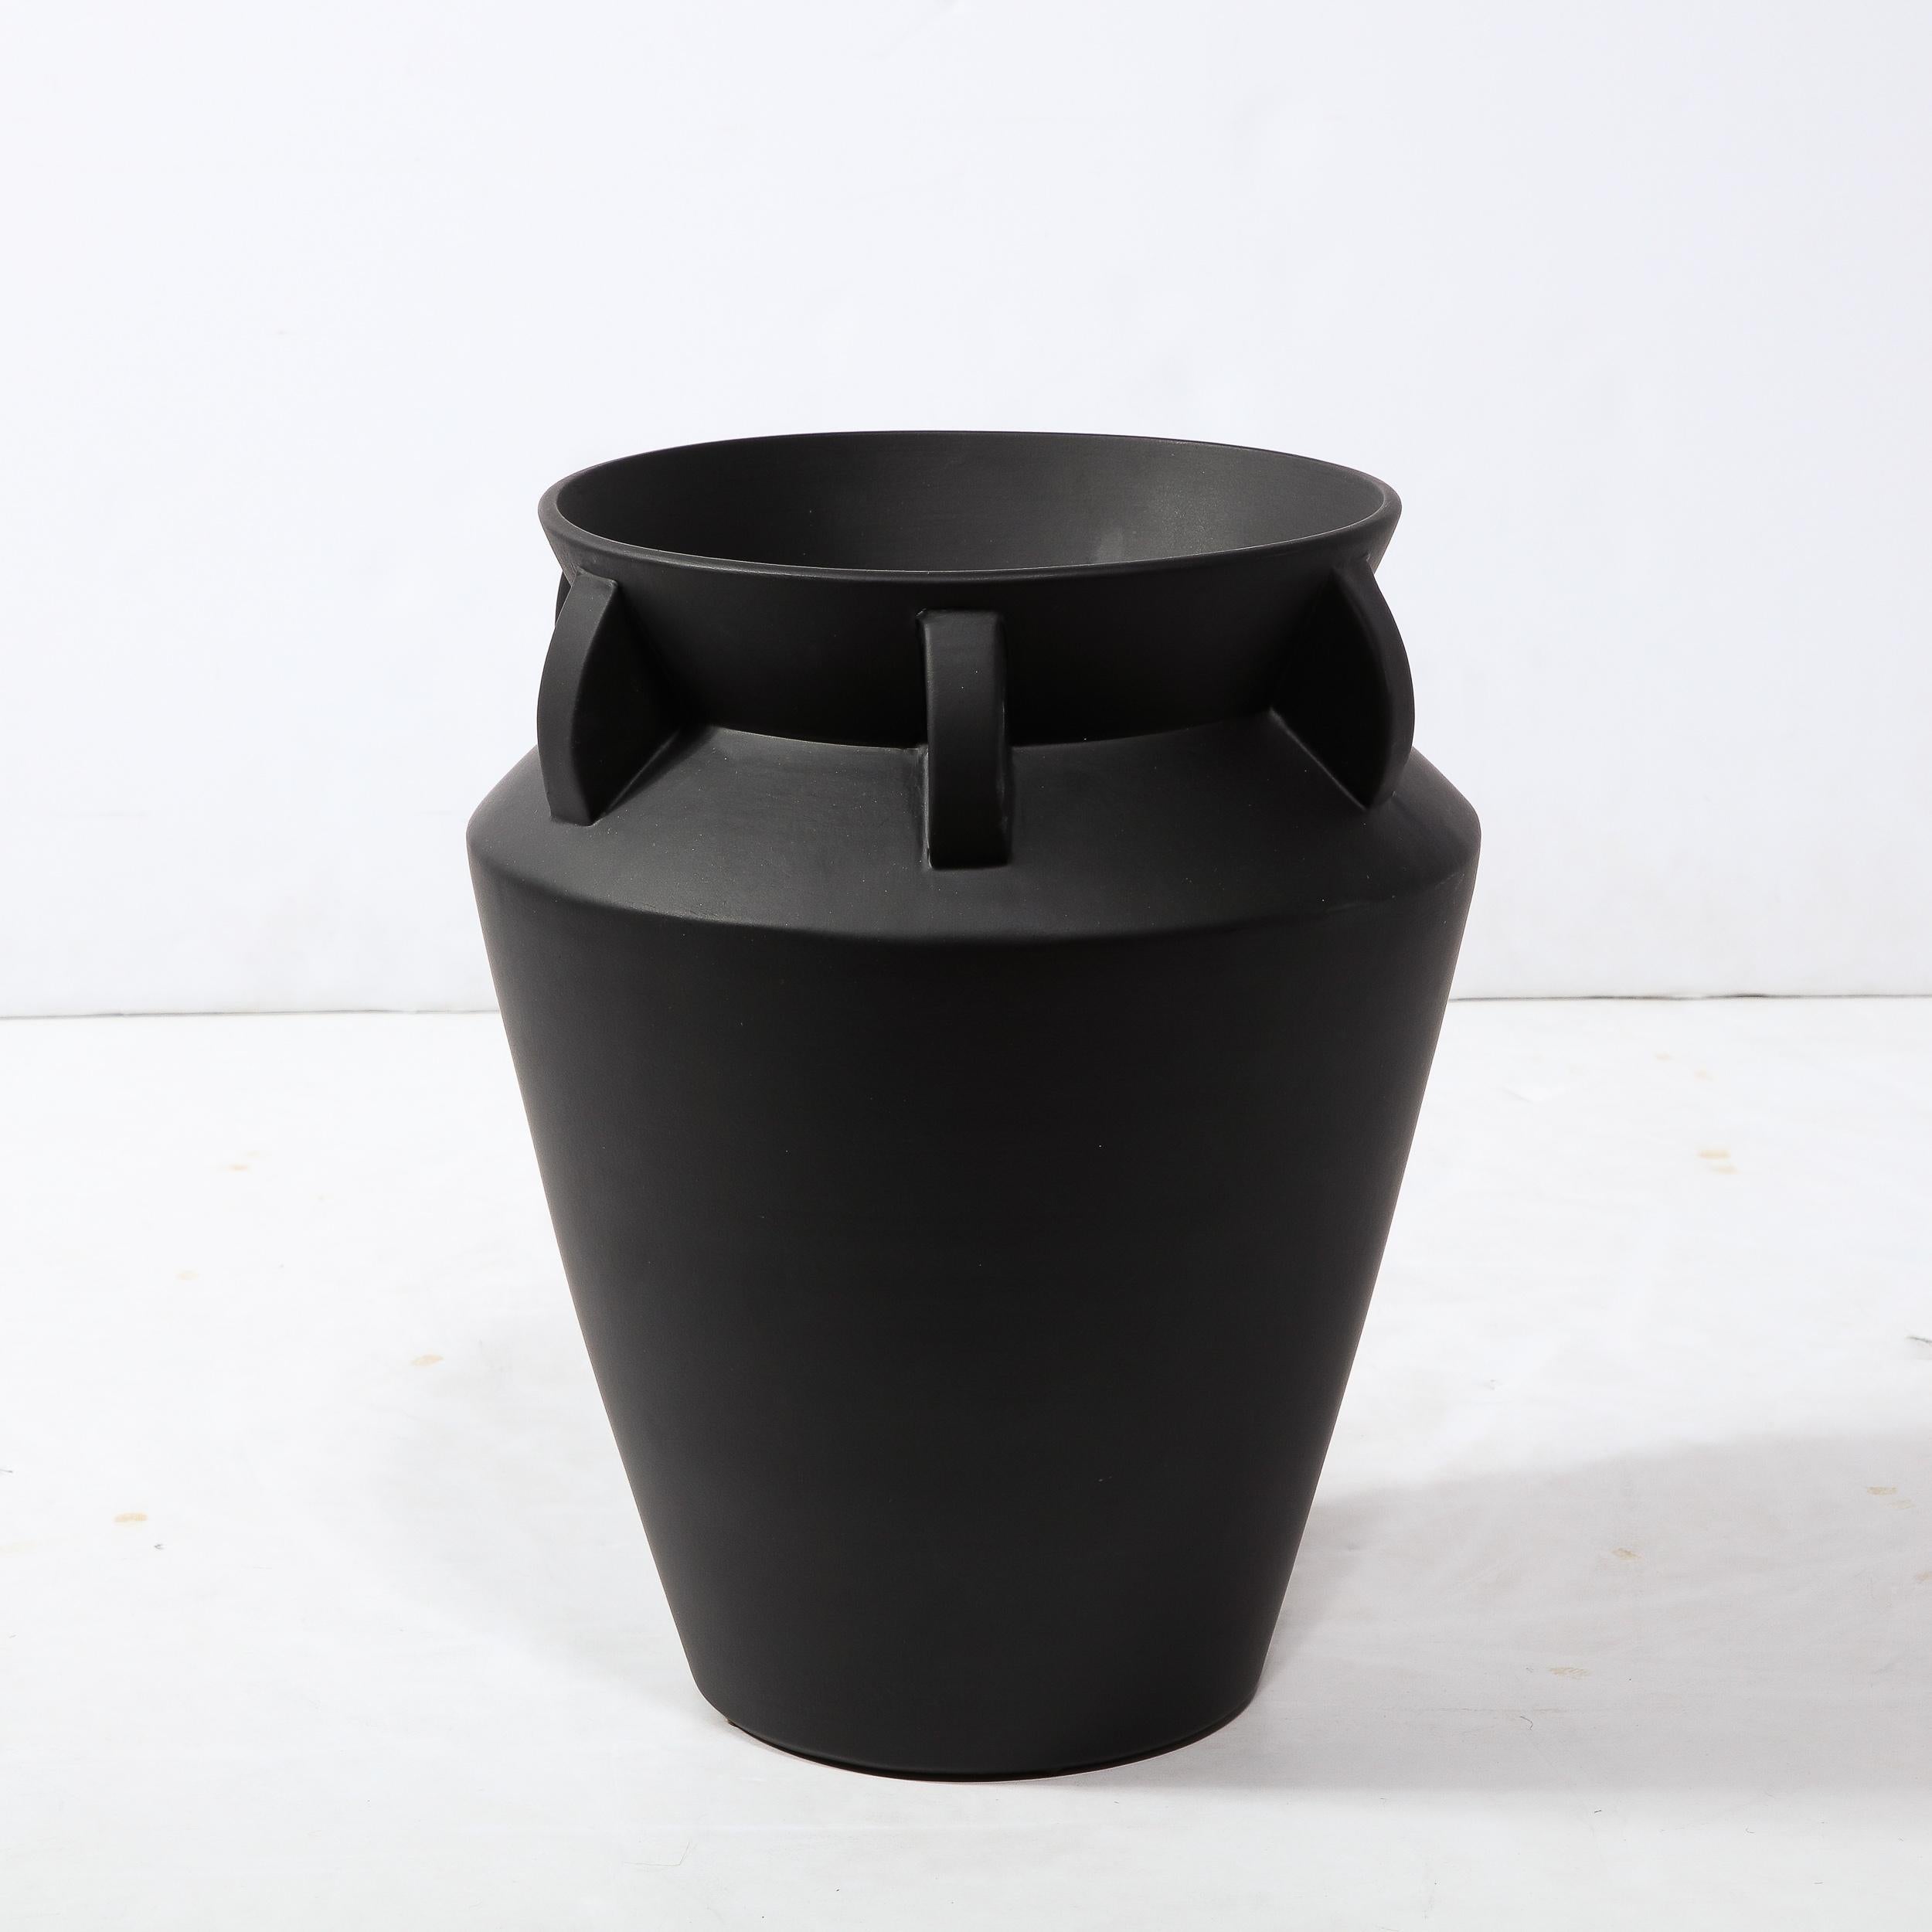 This elegant modernist urn form vase was realized in the United States during the latter half of the 20th century. It features a conical body that flares to an angled collar where it recedes meeting the neck that once again flares to a circular